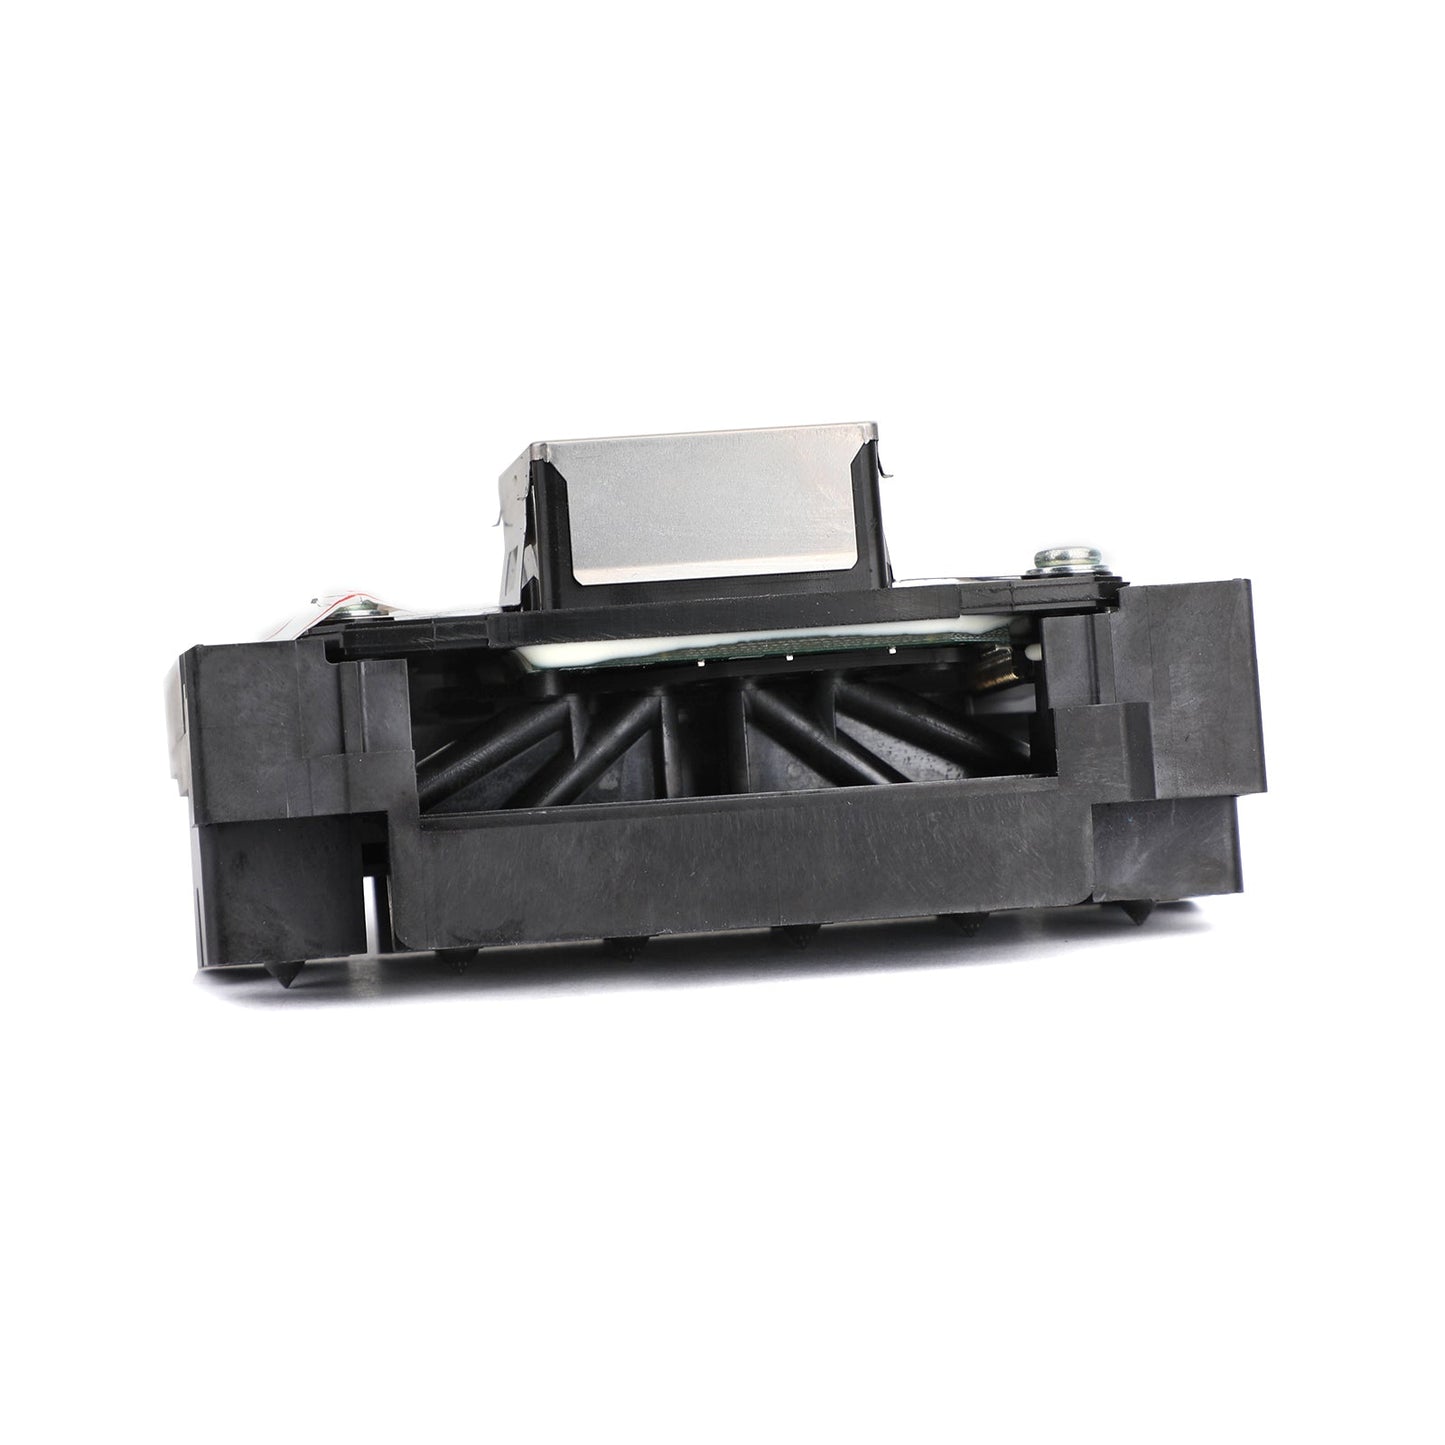 Replacement Printer Print Head F173050 For 1390/1400/1410/1430